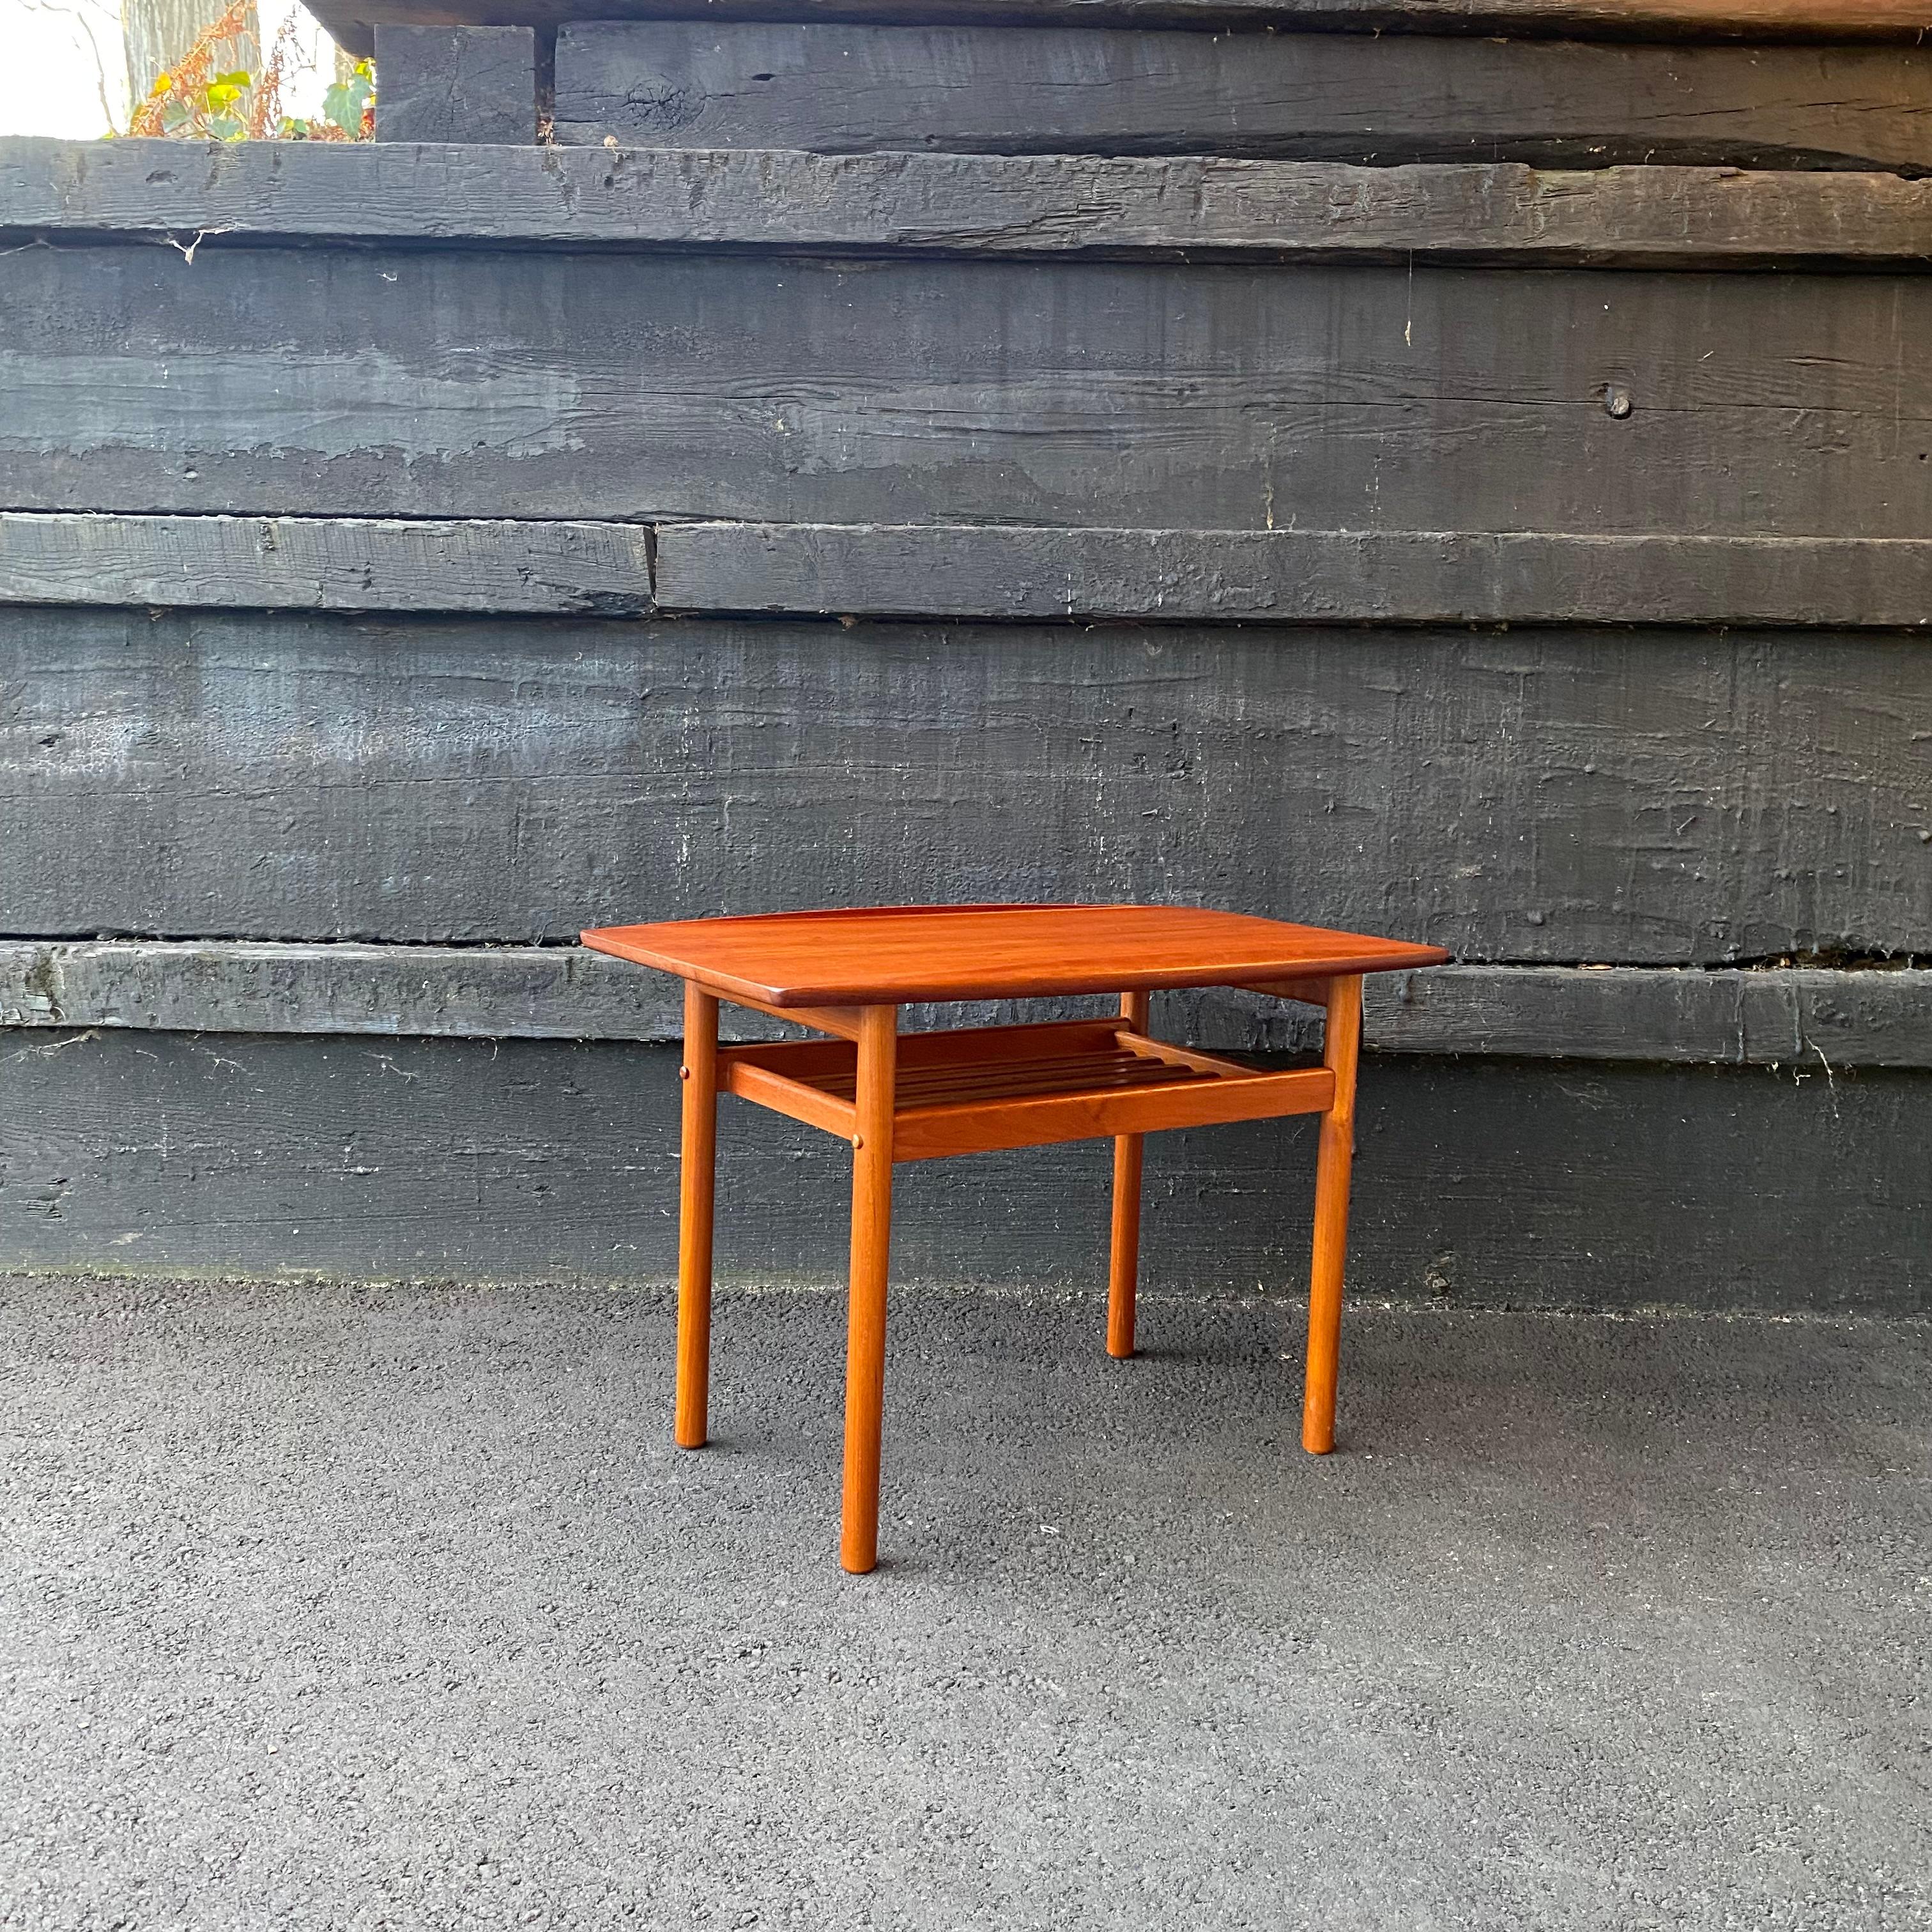 This is a beautiful sculpted teak side or end table designed by Grete Jalk for Poul Jeppesen, ca. 1960’s. There is a shelf made of slatted wood under the table top for storage. This piece came from Denmark to the US in the 1980’s. 

Condition: